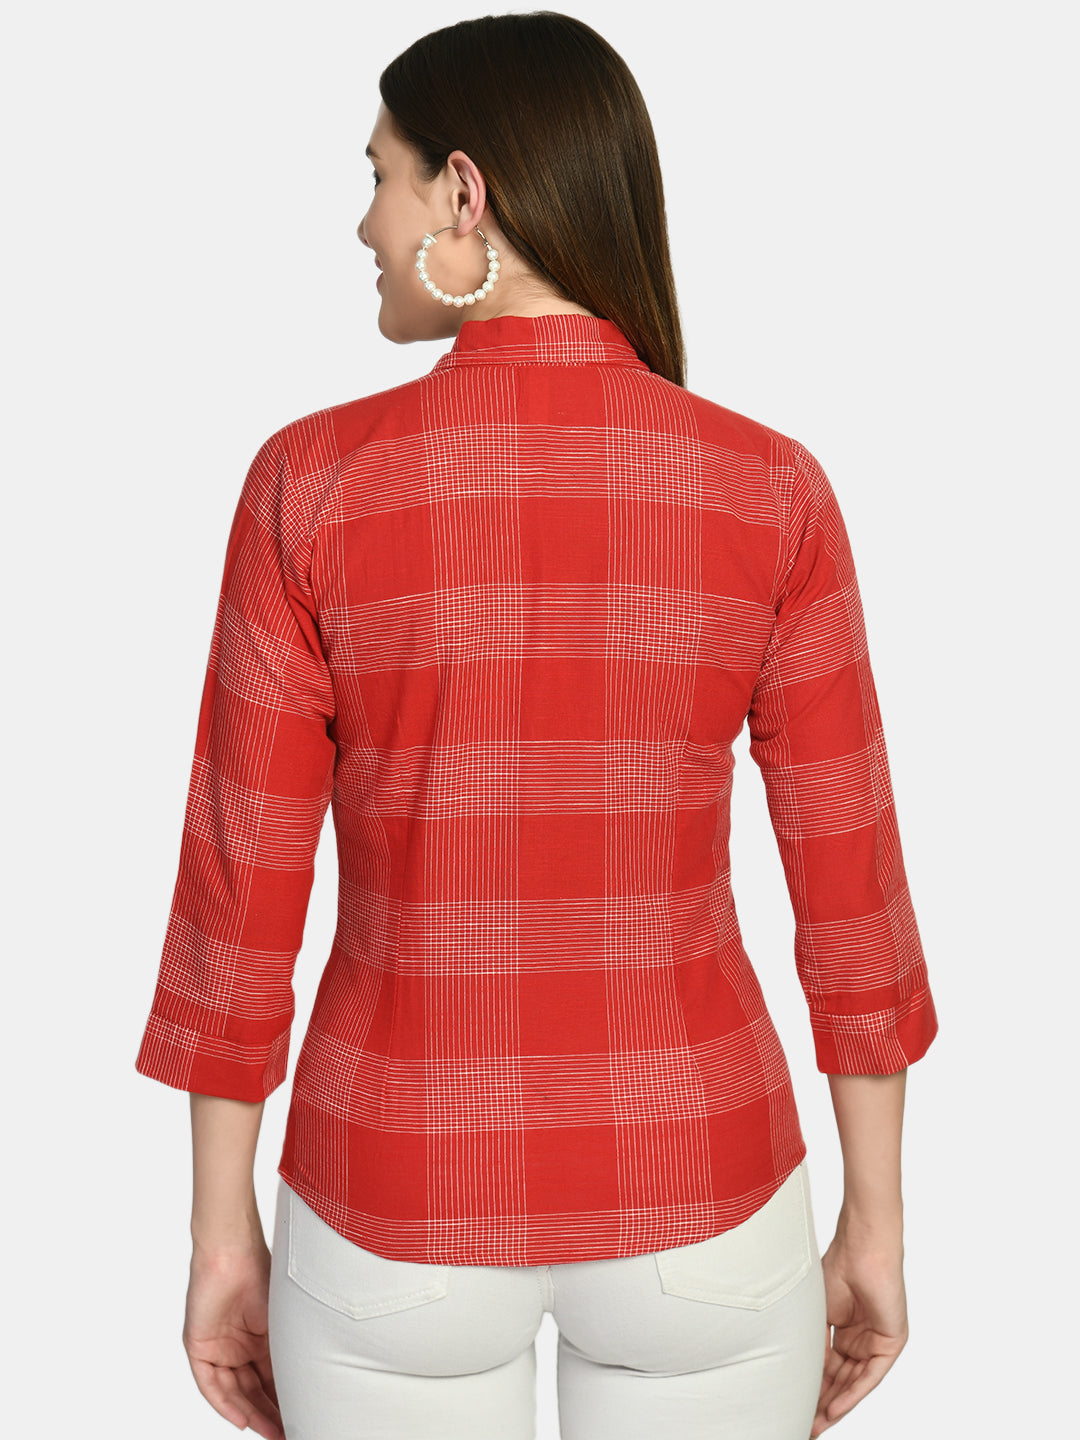 Women's Red Slim Fit Checked Formal Shirt - Wahe-Noor